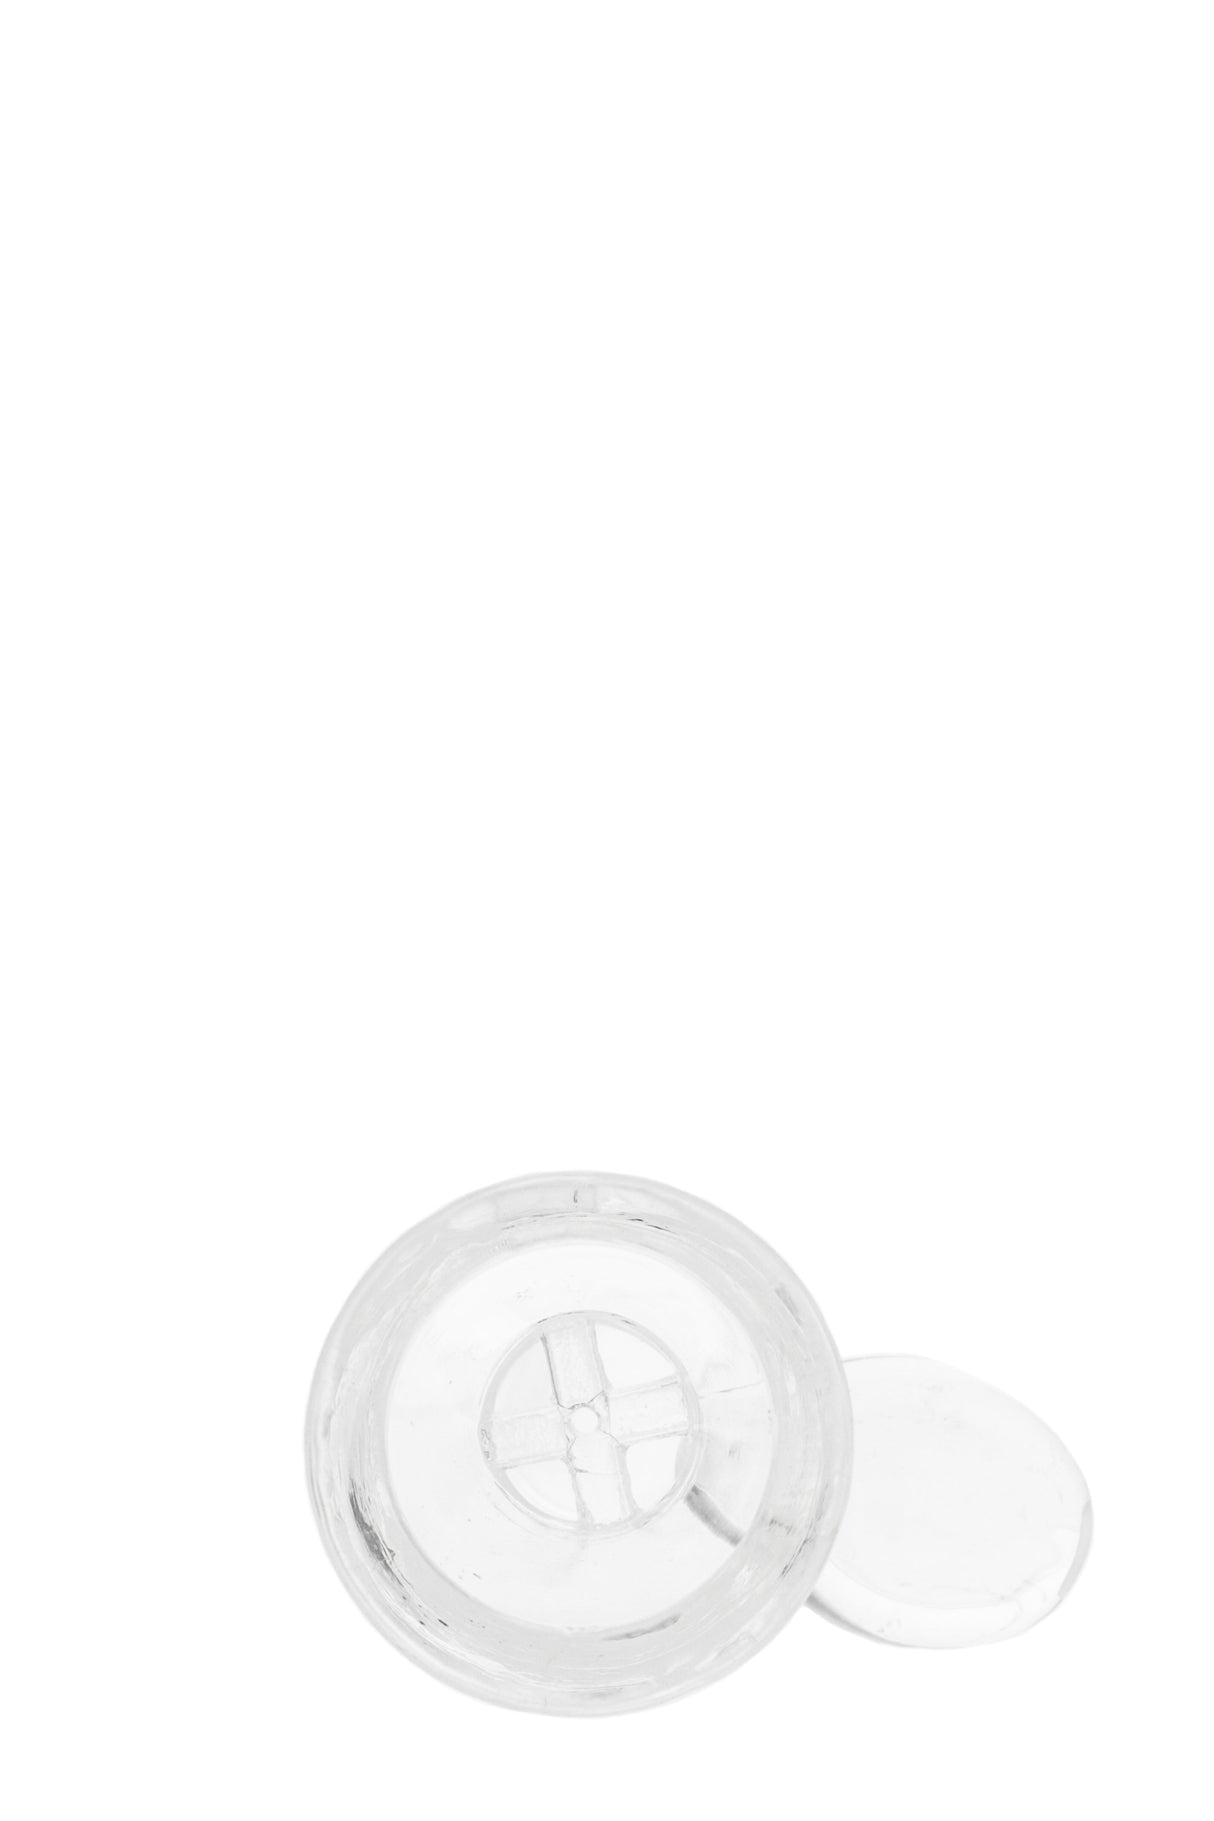 TAG clear glass bong slide with built-in screen and handle, top view on white background